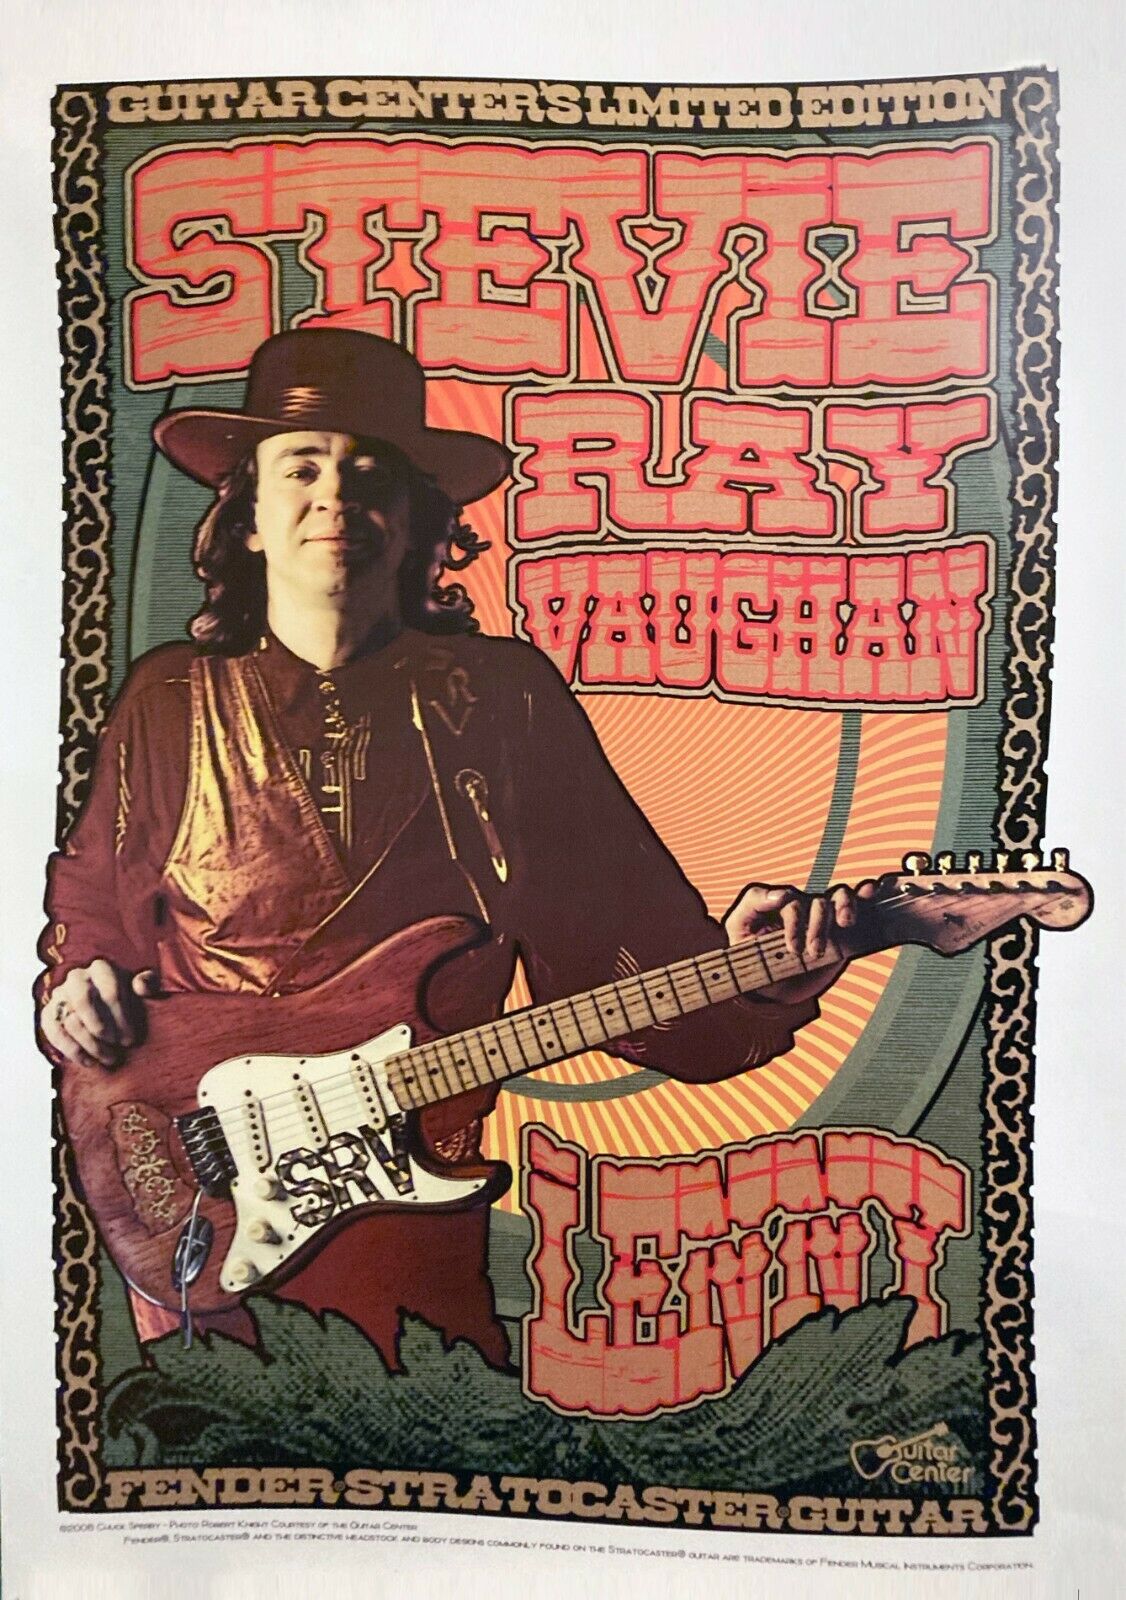 Stevie Ray Vaughan Poster: 2009. Mint. Extremely Limited Edition Lithograph.